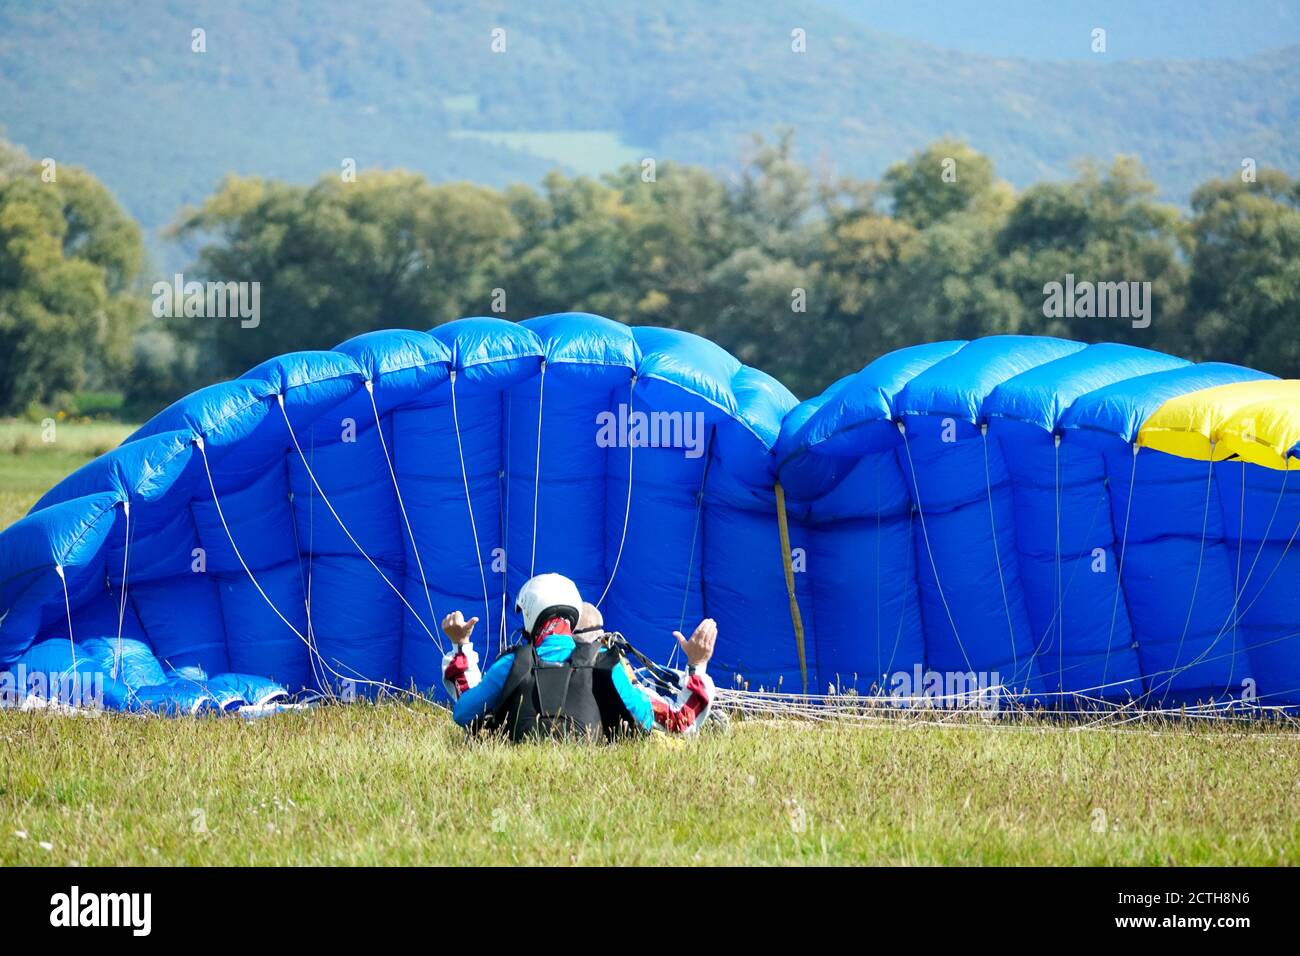 Tandem skydiving landing colourful photography with unrecognisable persons in Slavnica, Slovakia on Sept. 20, 2020. Stock Photo